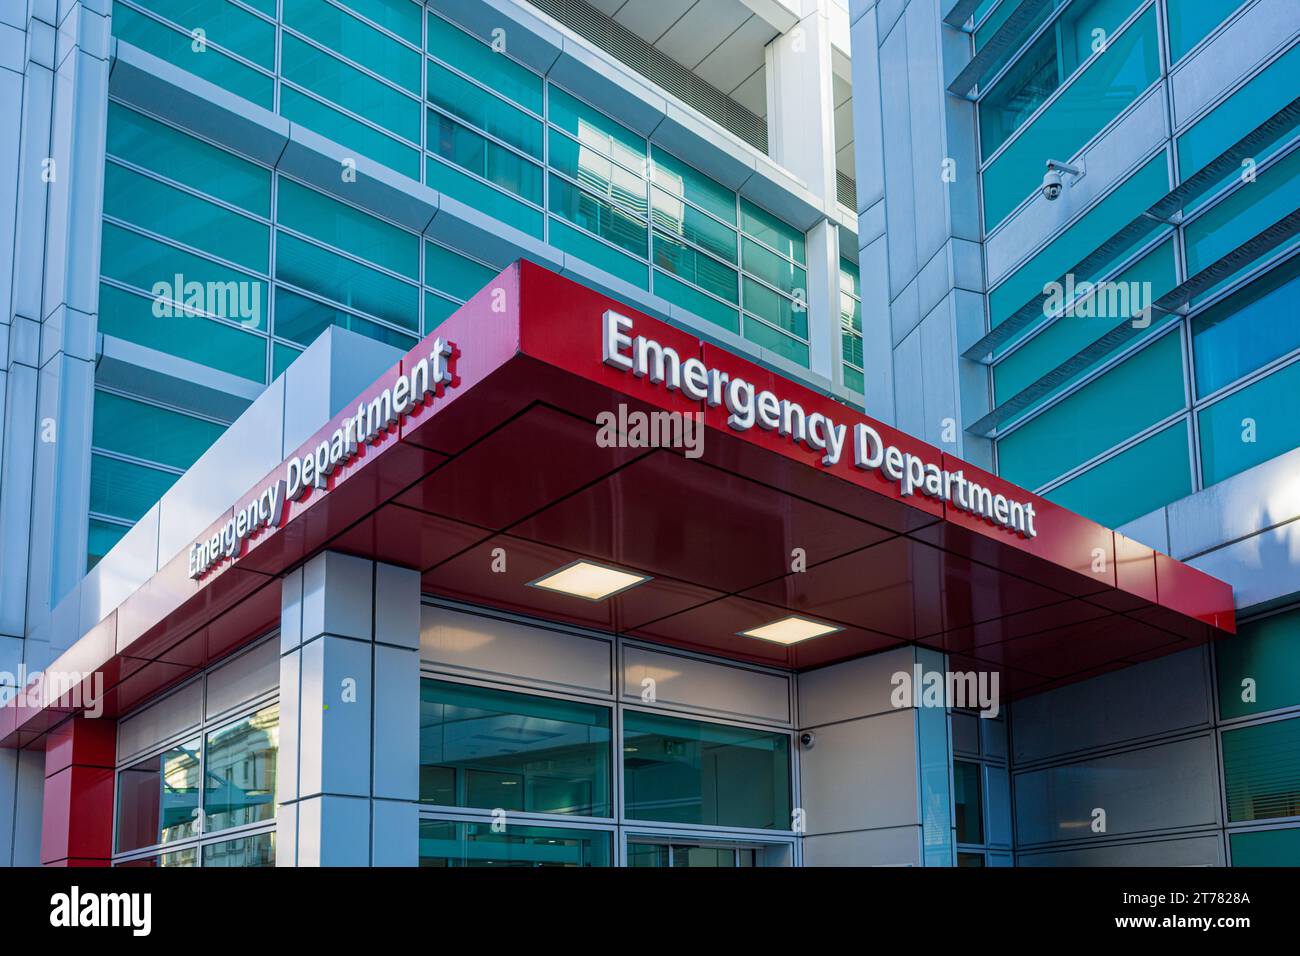 UK Hospital Emergency Department - Hospital A&E Emergency Department - Accident and Emergency Department at a large UK hospital in central London. Stock Photo